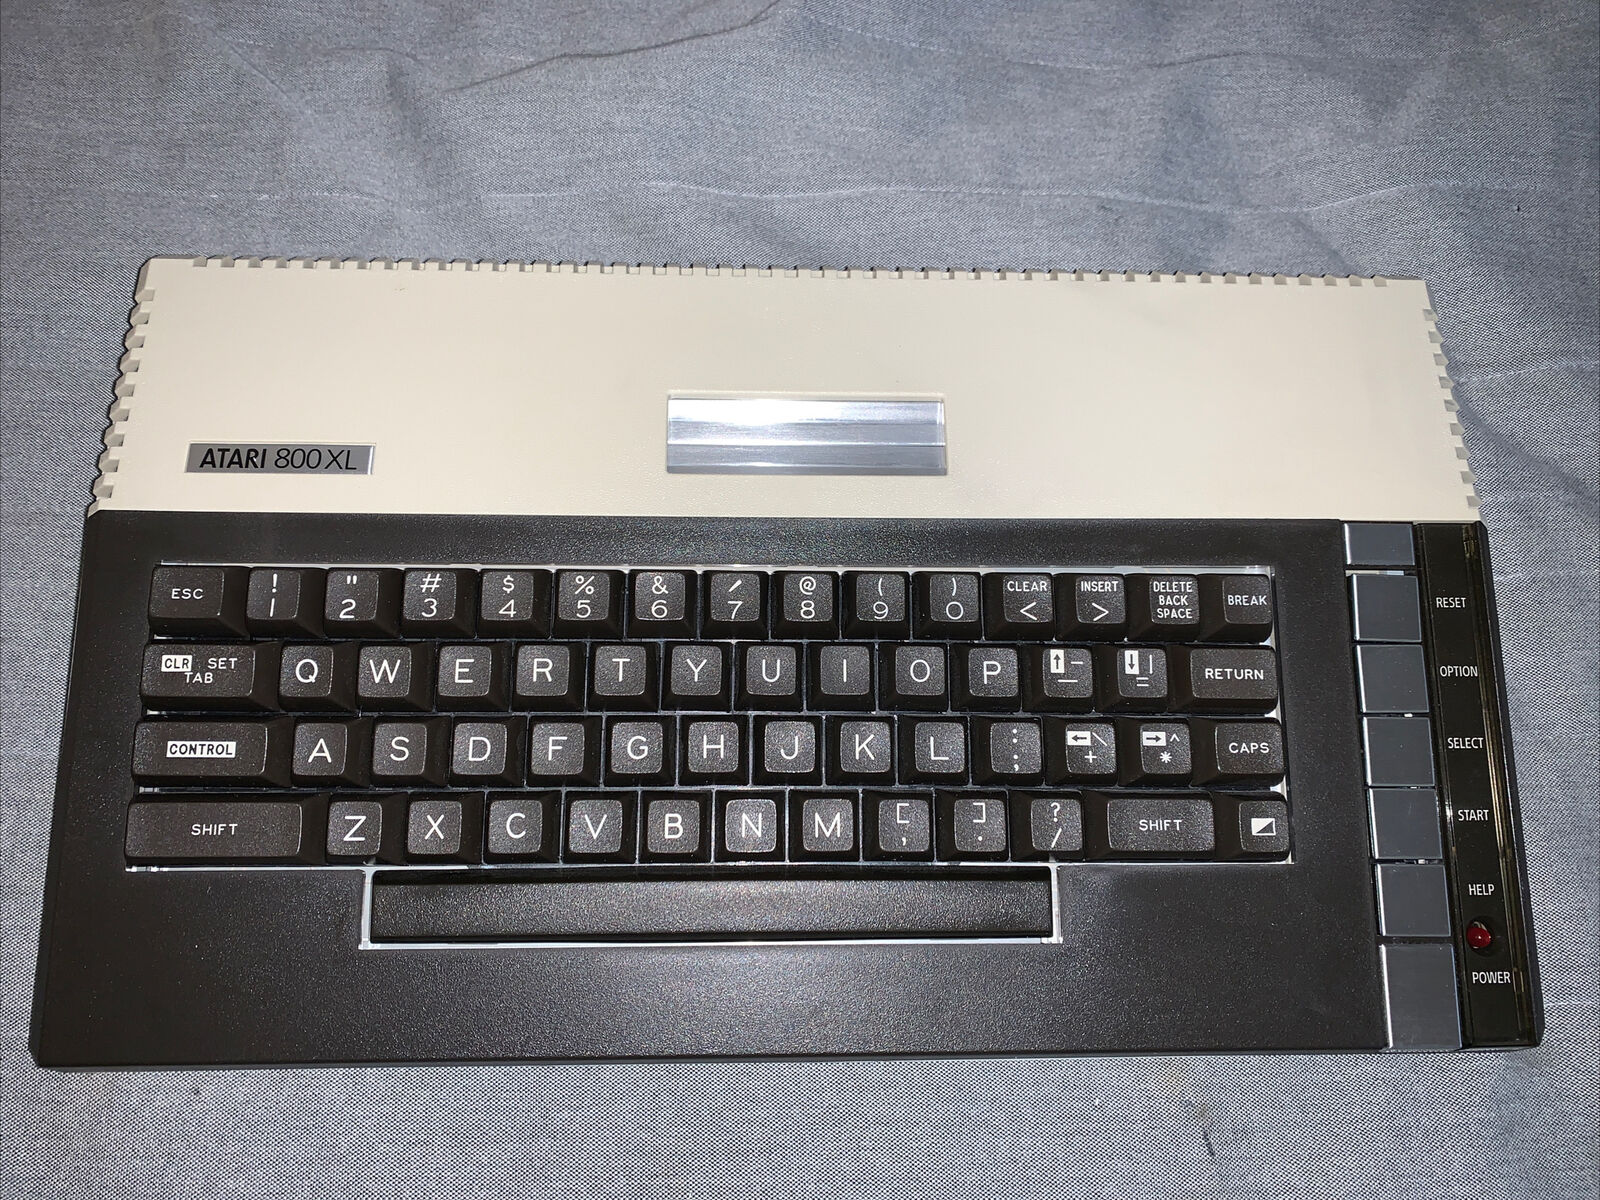 Atari 800xl in  M I N T  condition